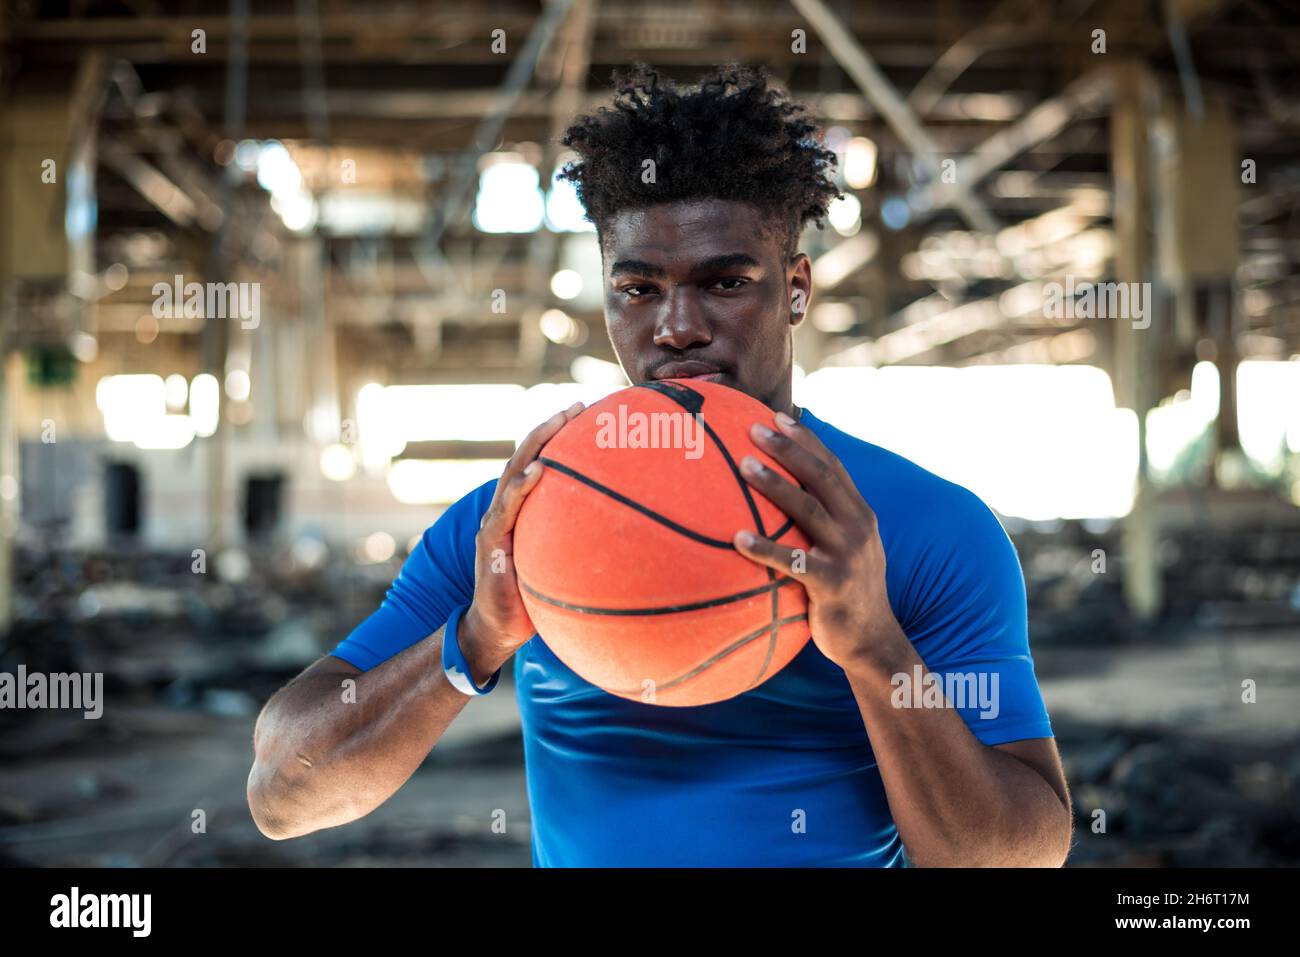 1970s AFRICAN AMERICAN MAN BASKETBALL PLAYER HOLDING BALL Stock Photo -  Alamy